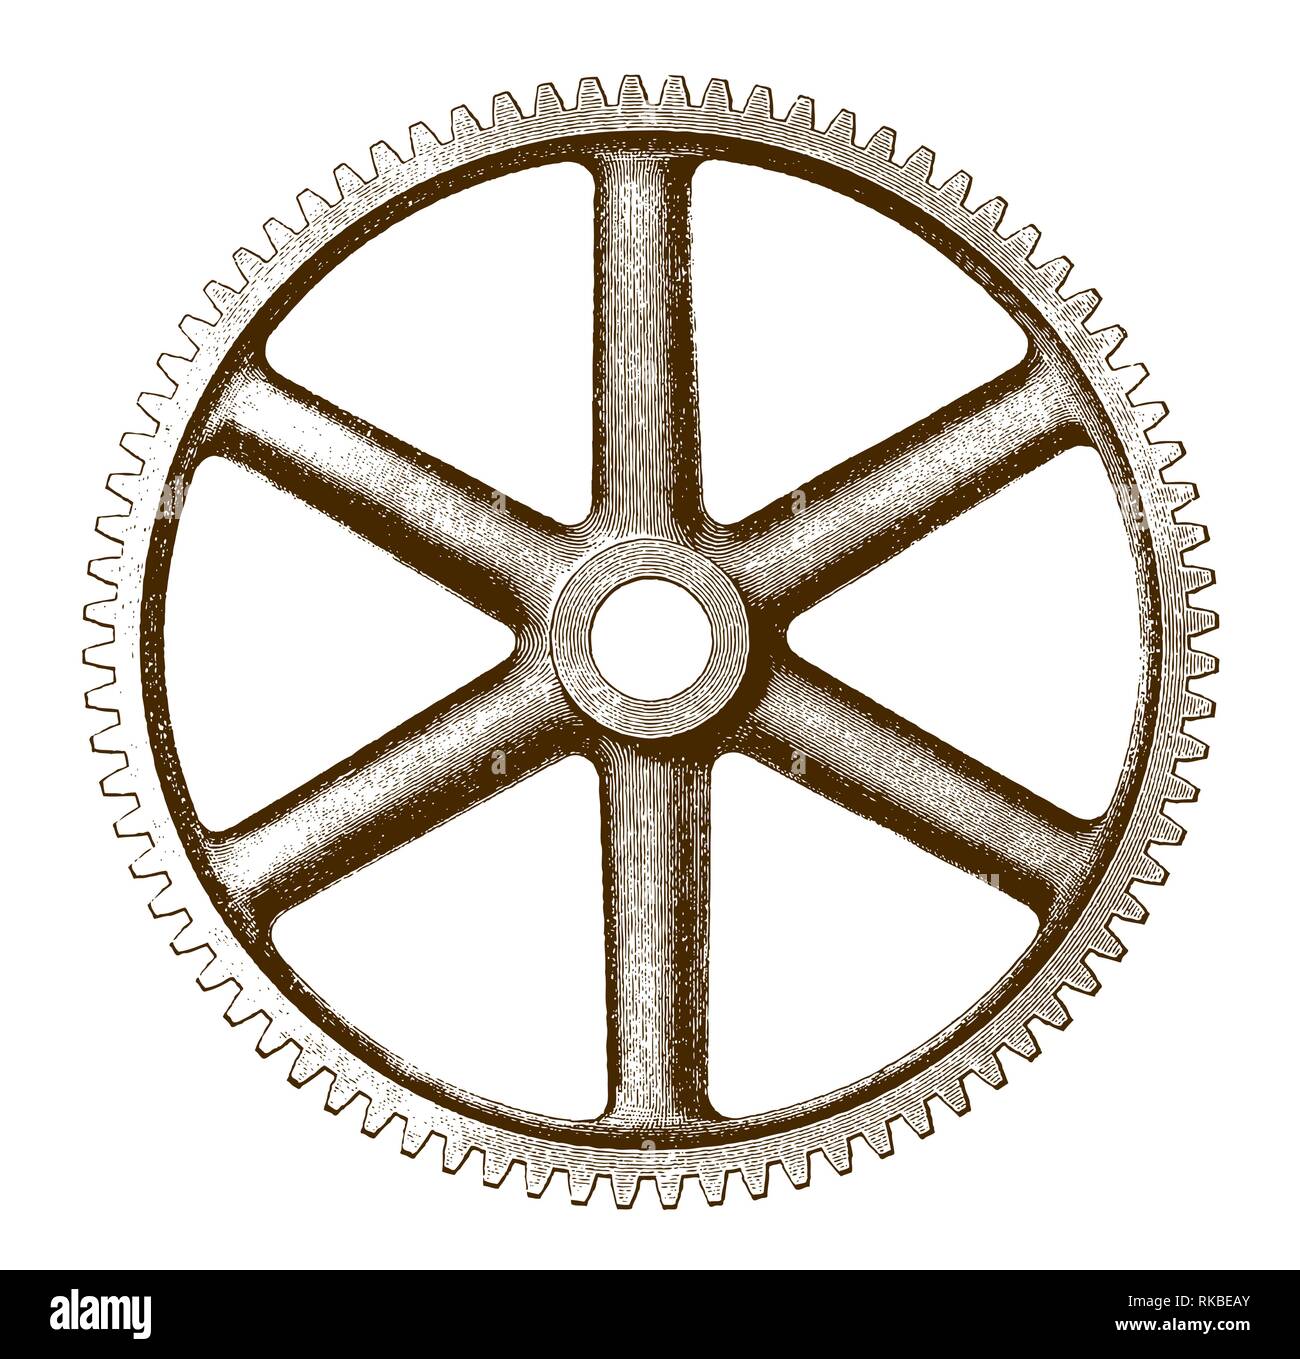 Historic illustration of an iron gear or cog in frontal view (after an engraving or etching from the 19th century) Stock Vector